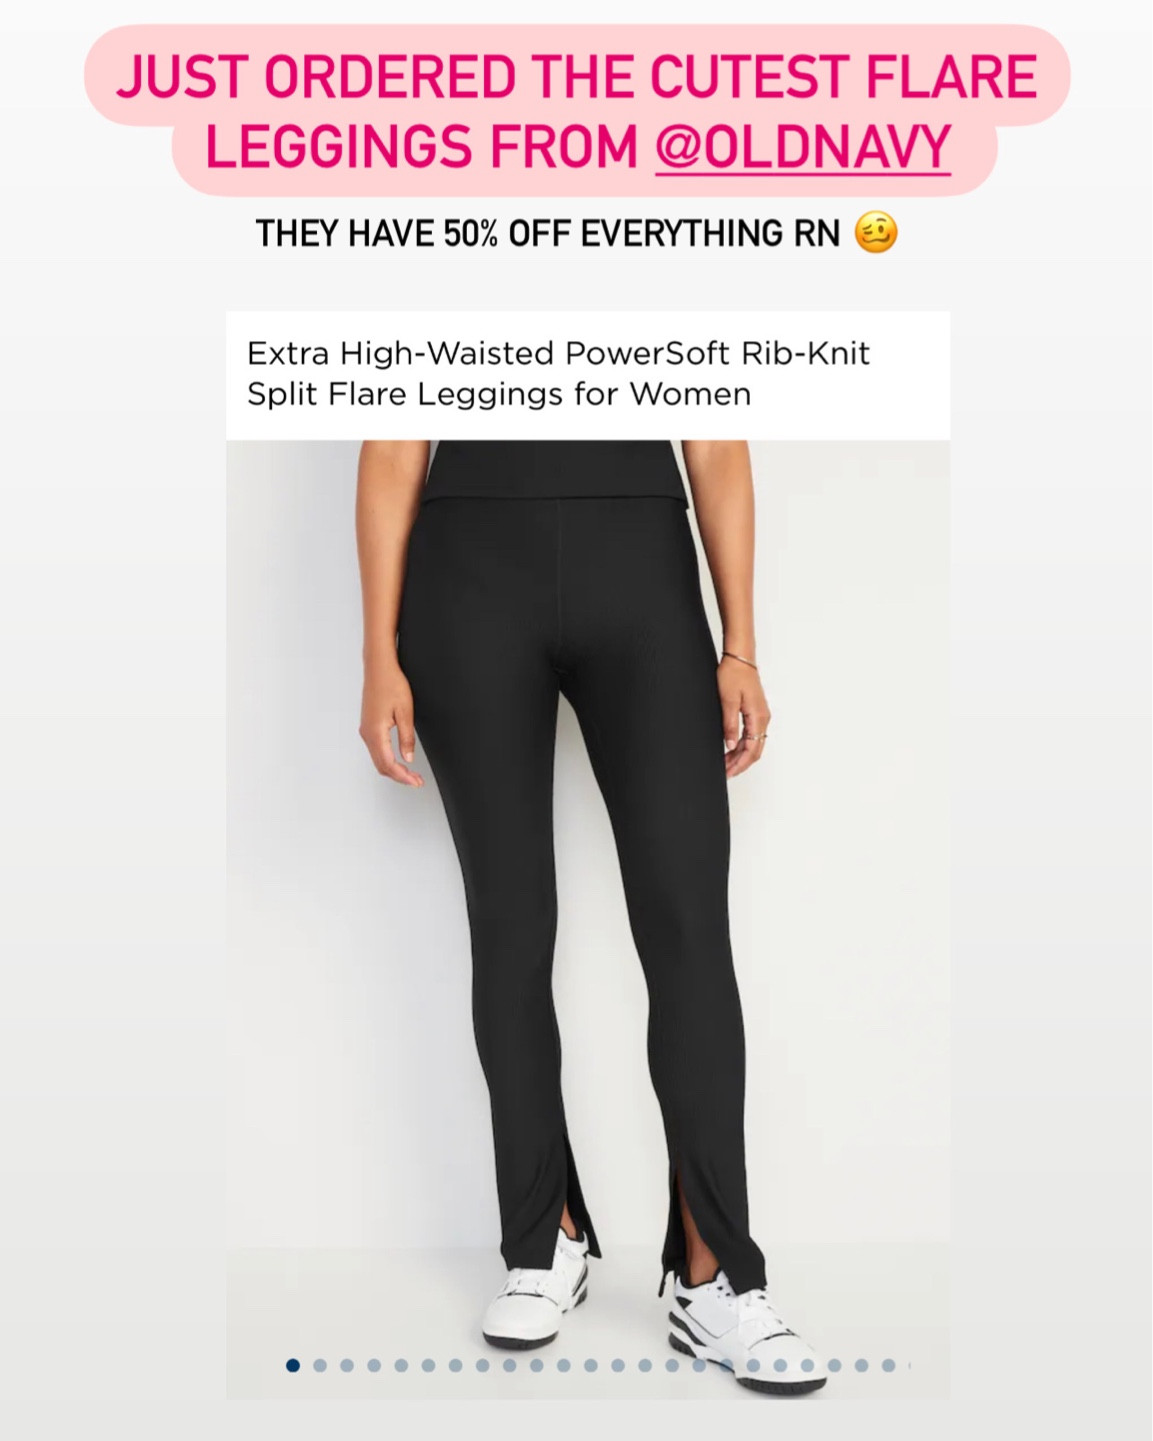 Extra High-Waisted PowerSoft Rib-Knit Flare Leggings for Women, Old Navy